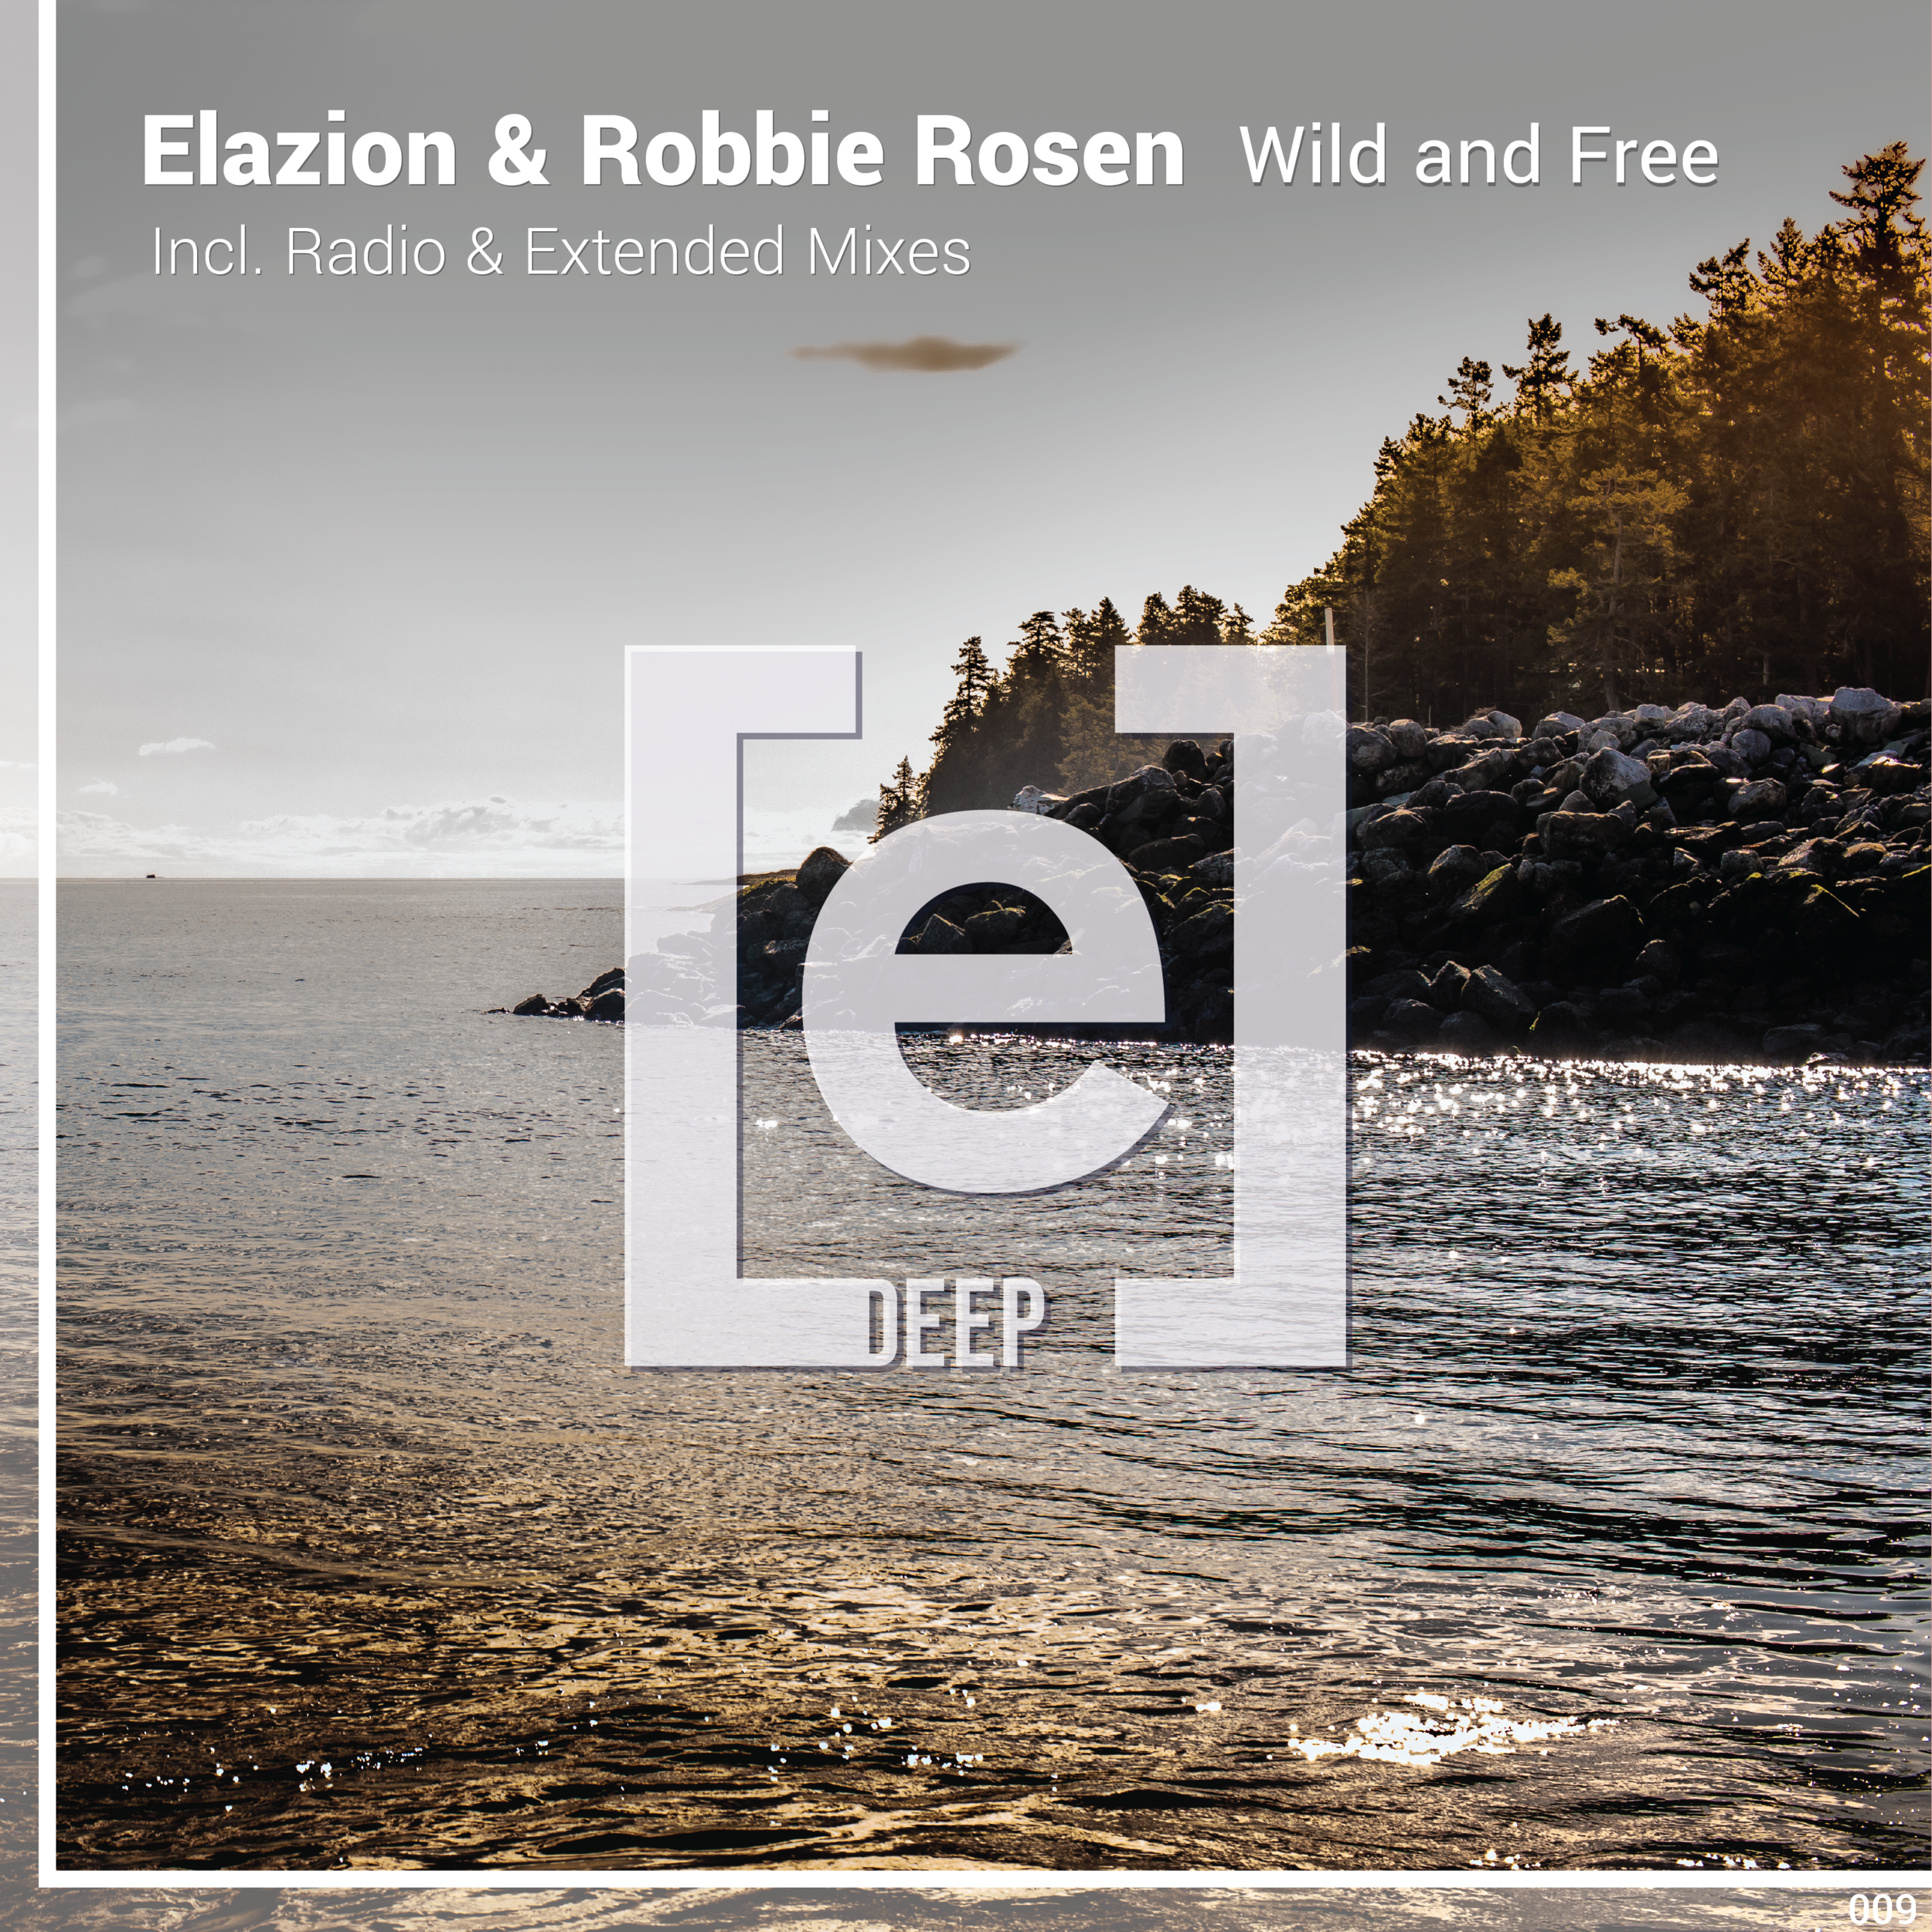 Elazion & Robbie Rosen - Wild and Free (Cover).png